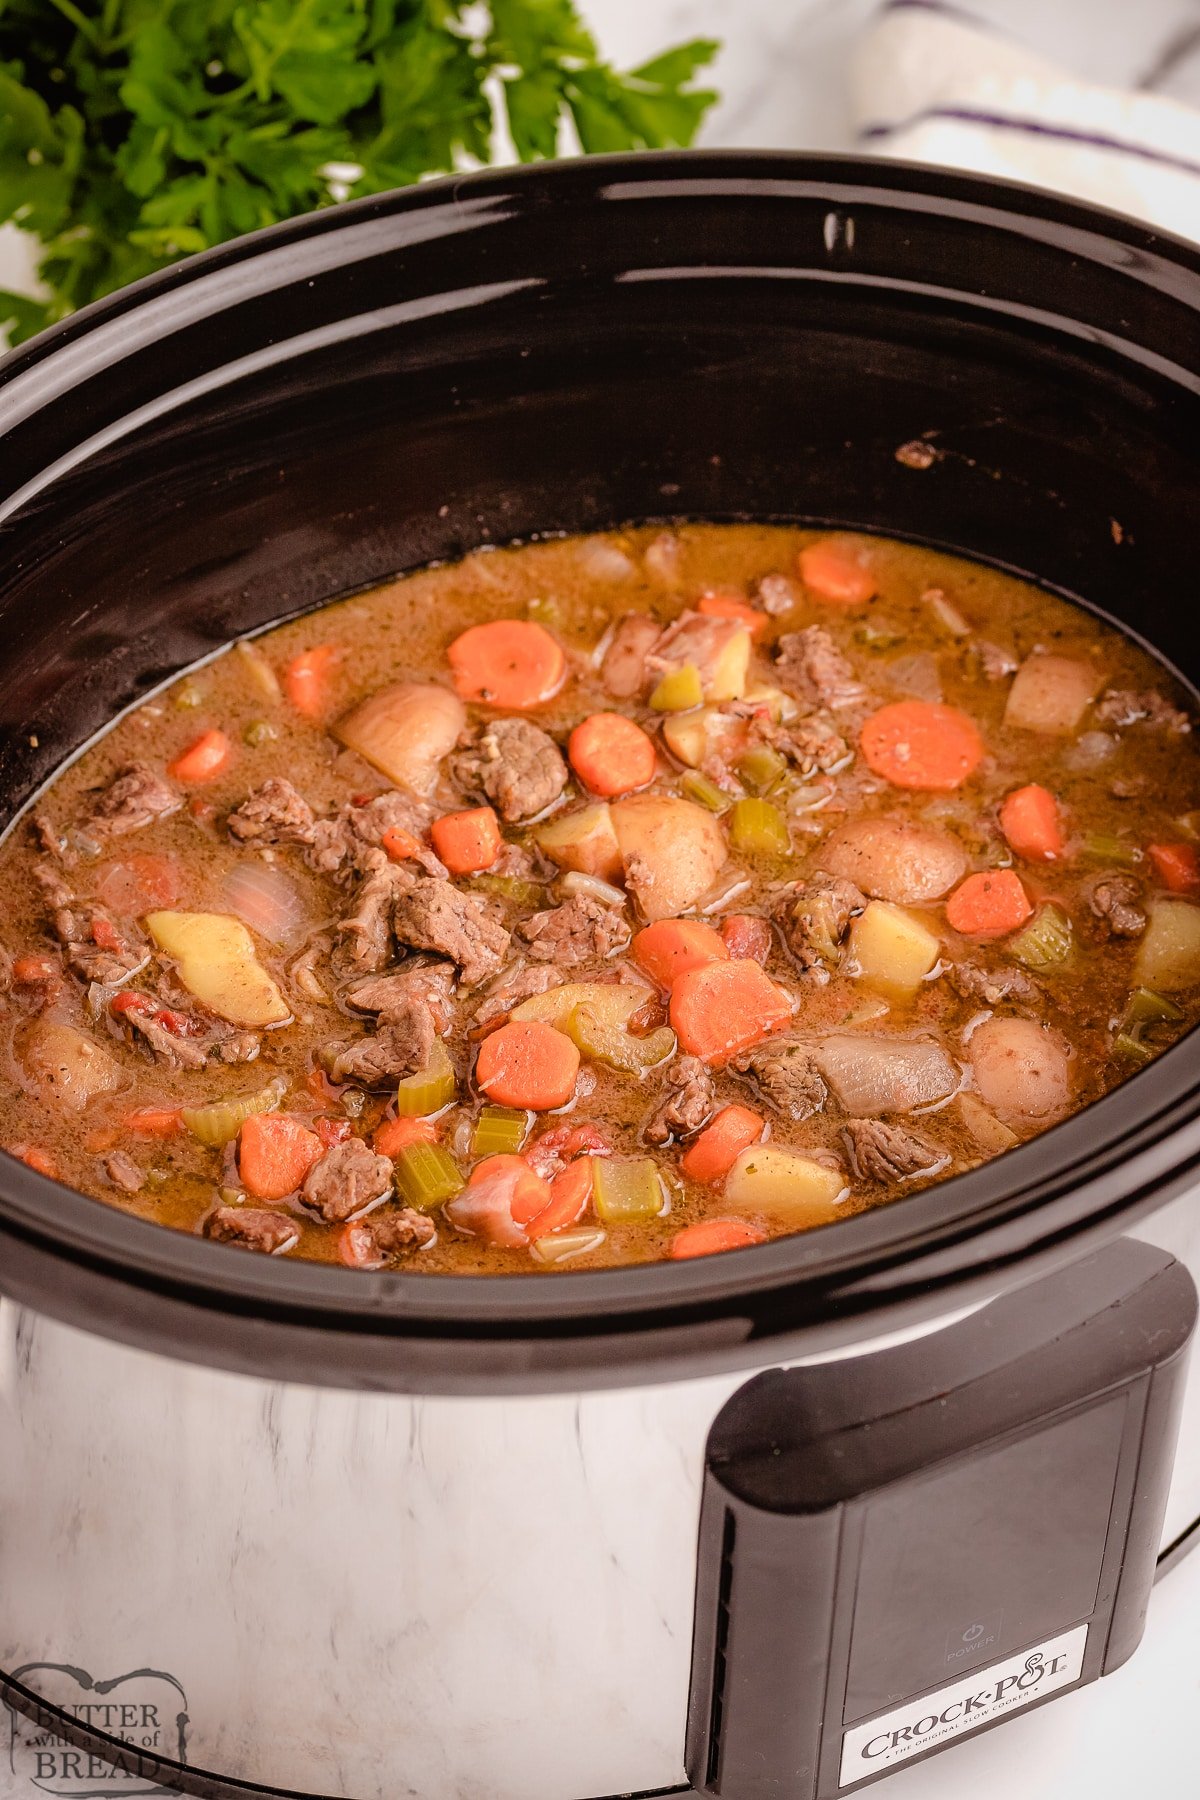 Best Crock Pot Beef Stew recipe made with tender chunks of beef, loads of vegetables and a simple mixture of broth and spices that yields incredible home style beef stew.